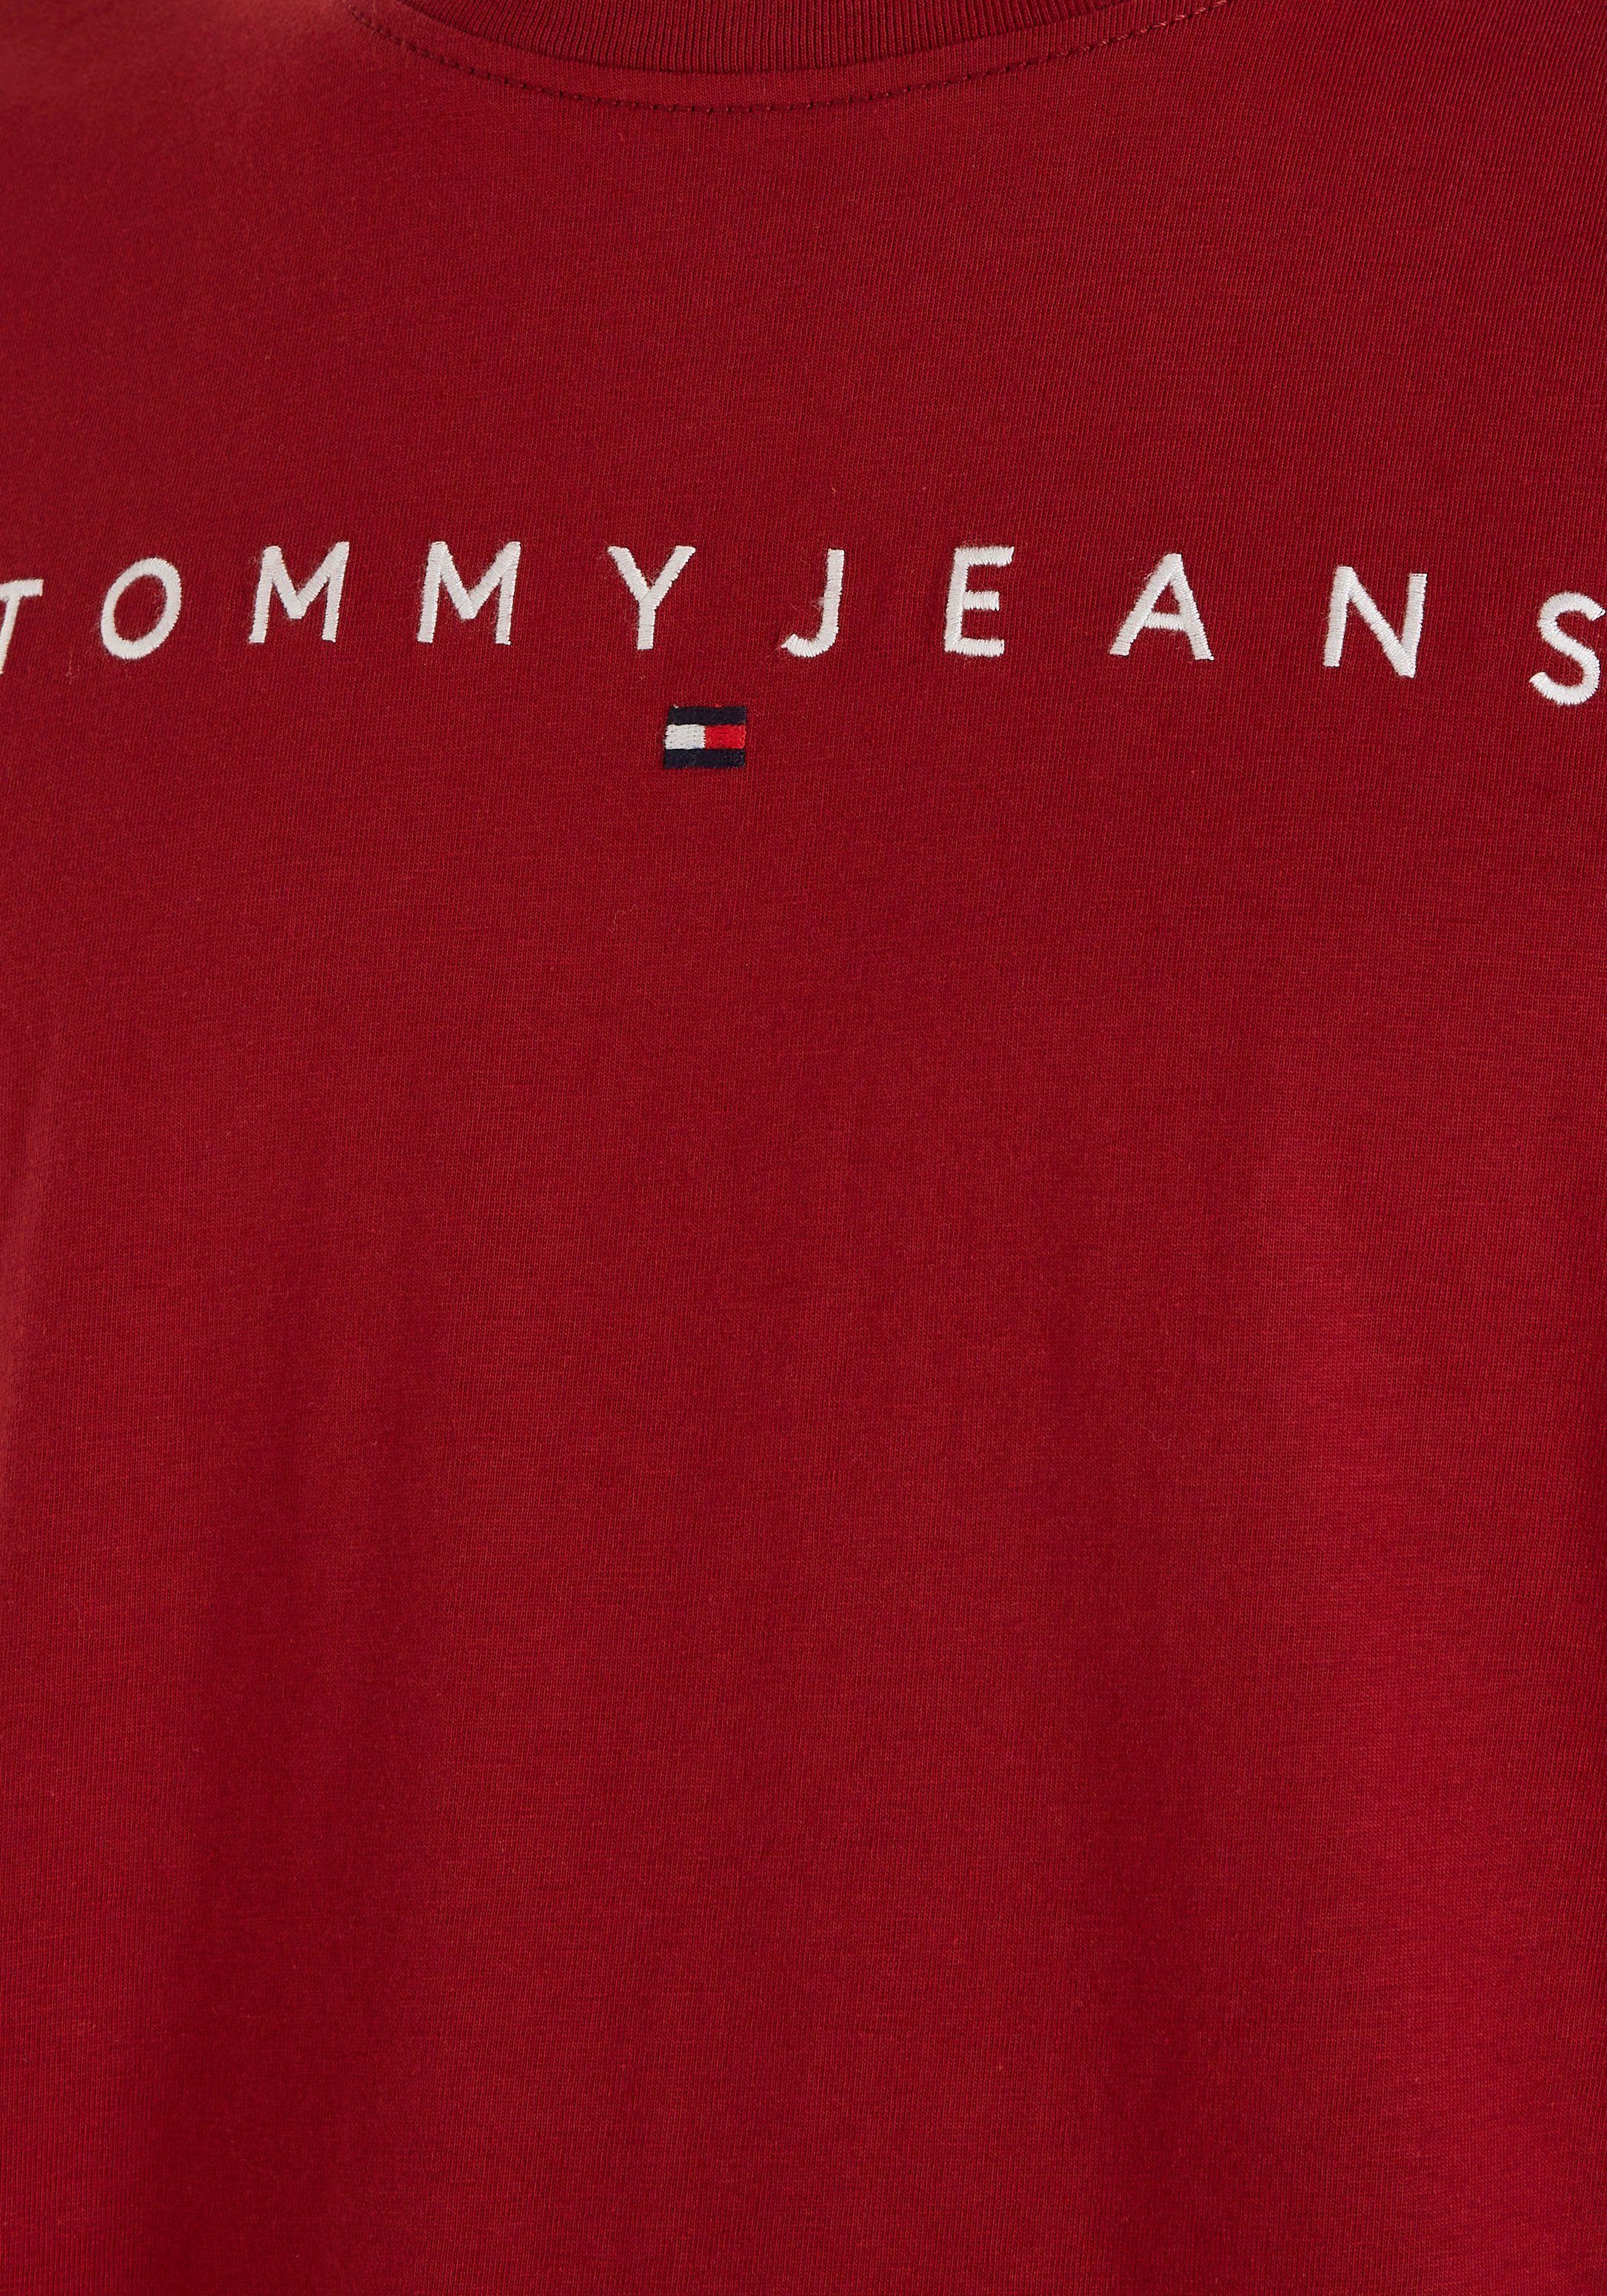 Magma Jeans LINEAR EXT TEE Logo-Schriftzug Plus T-Shirt LOGO Tommy mit REG Tommy Jeans TJM Red